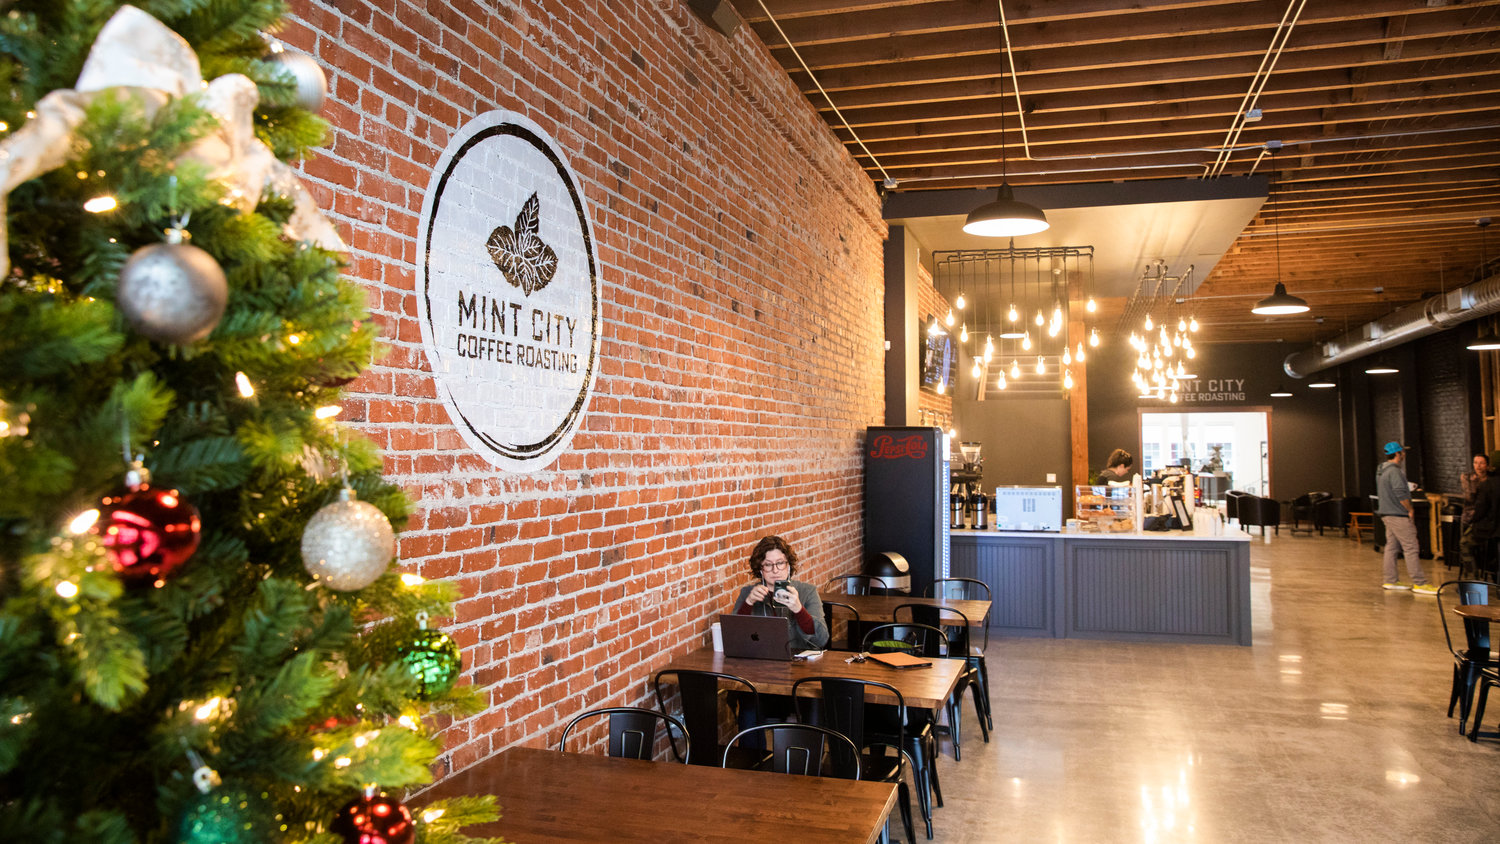 A Christmas tree sits on display at Mint City Coffee Roasting on opening day Tuesday morning in Chehalis.